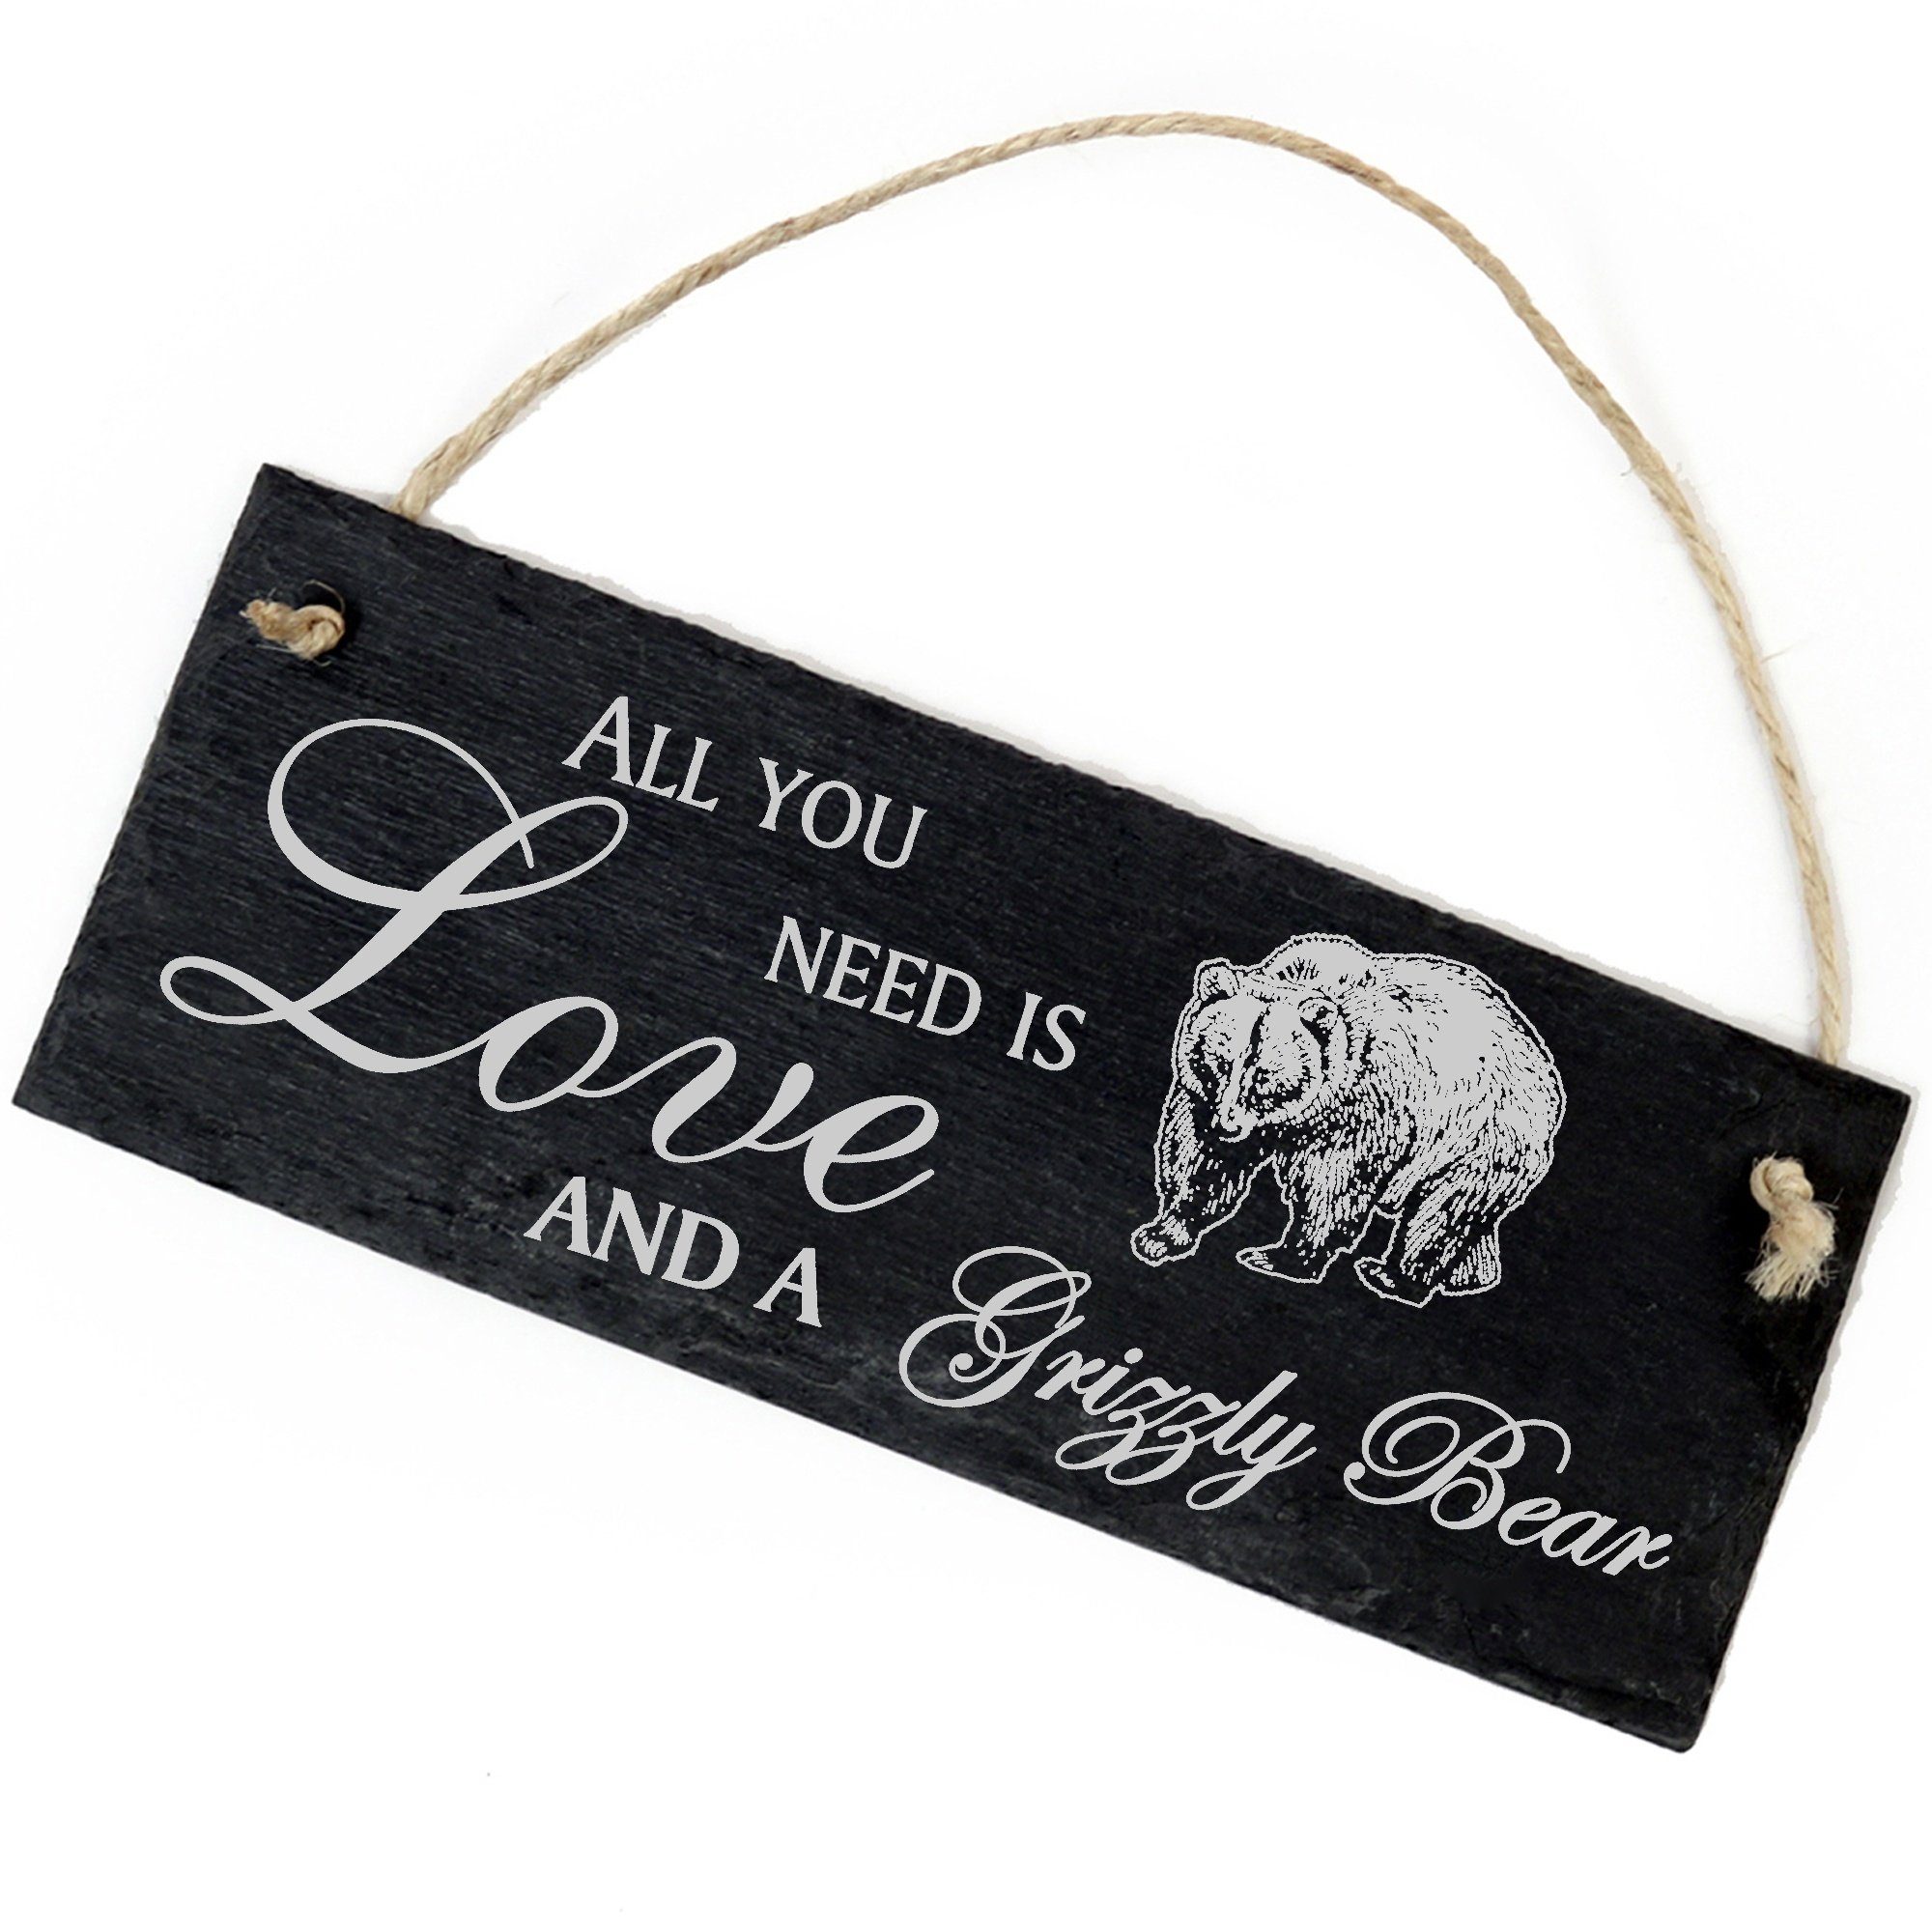 Dekolando Hängedekoration Grizzly Bär 22x8cm All you need is Love and a Grizzly Bear